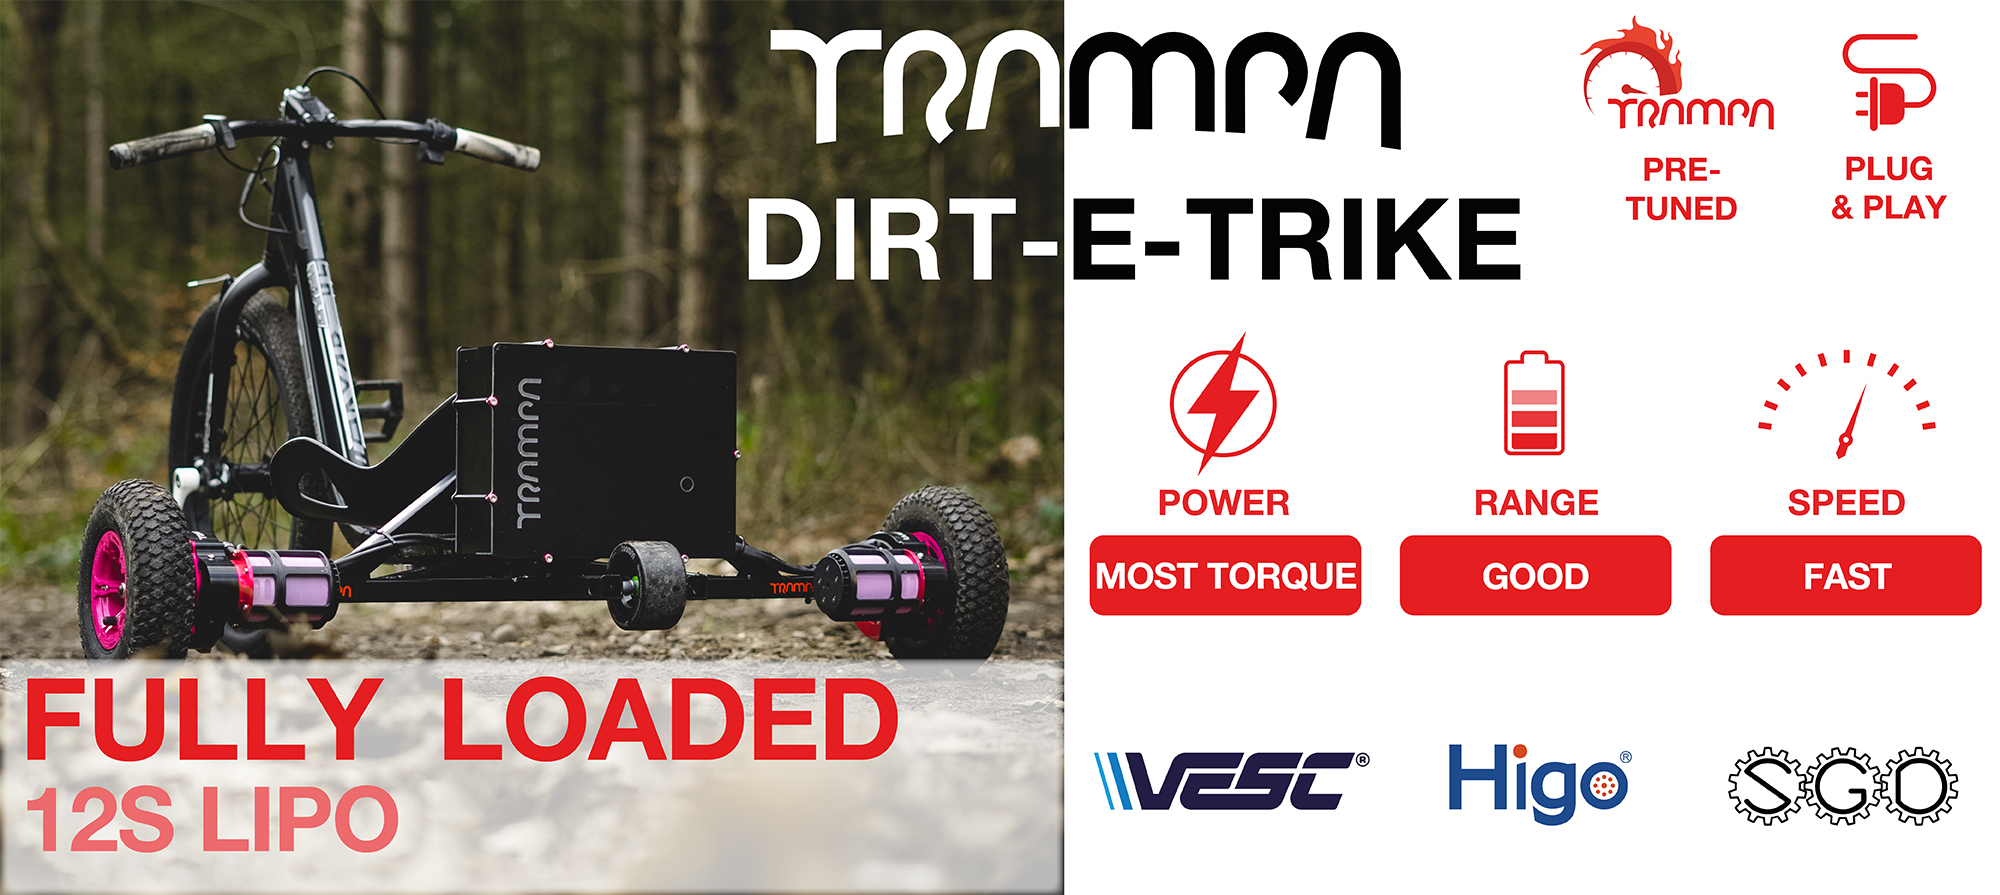 TRAMPA's DRIFT-E-TRIKE is assembled from many of the existing parts TRAMPA already uses to make its amazing Electric Mountainboard decks giving so much unreal fun!!